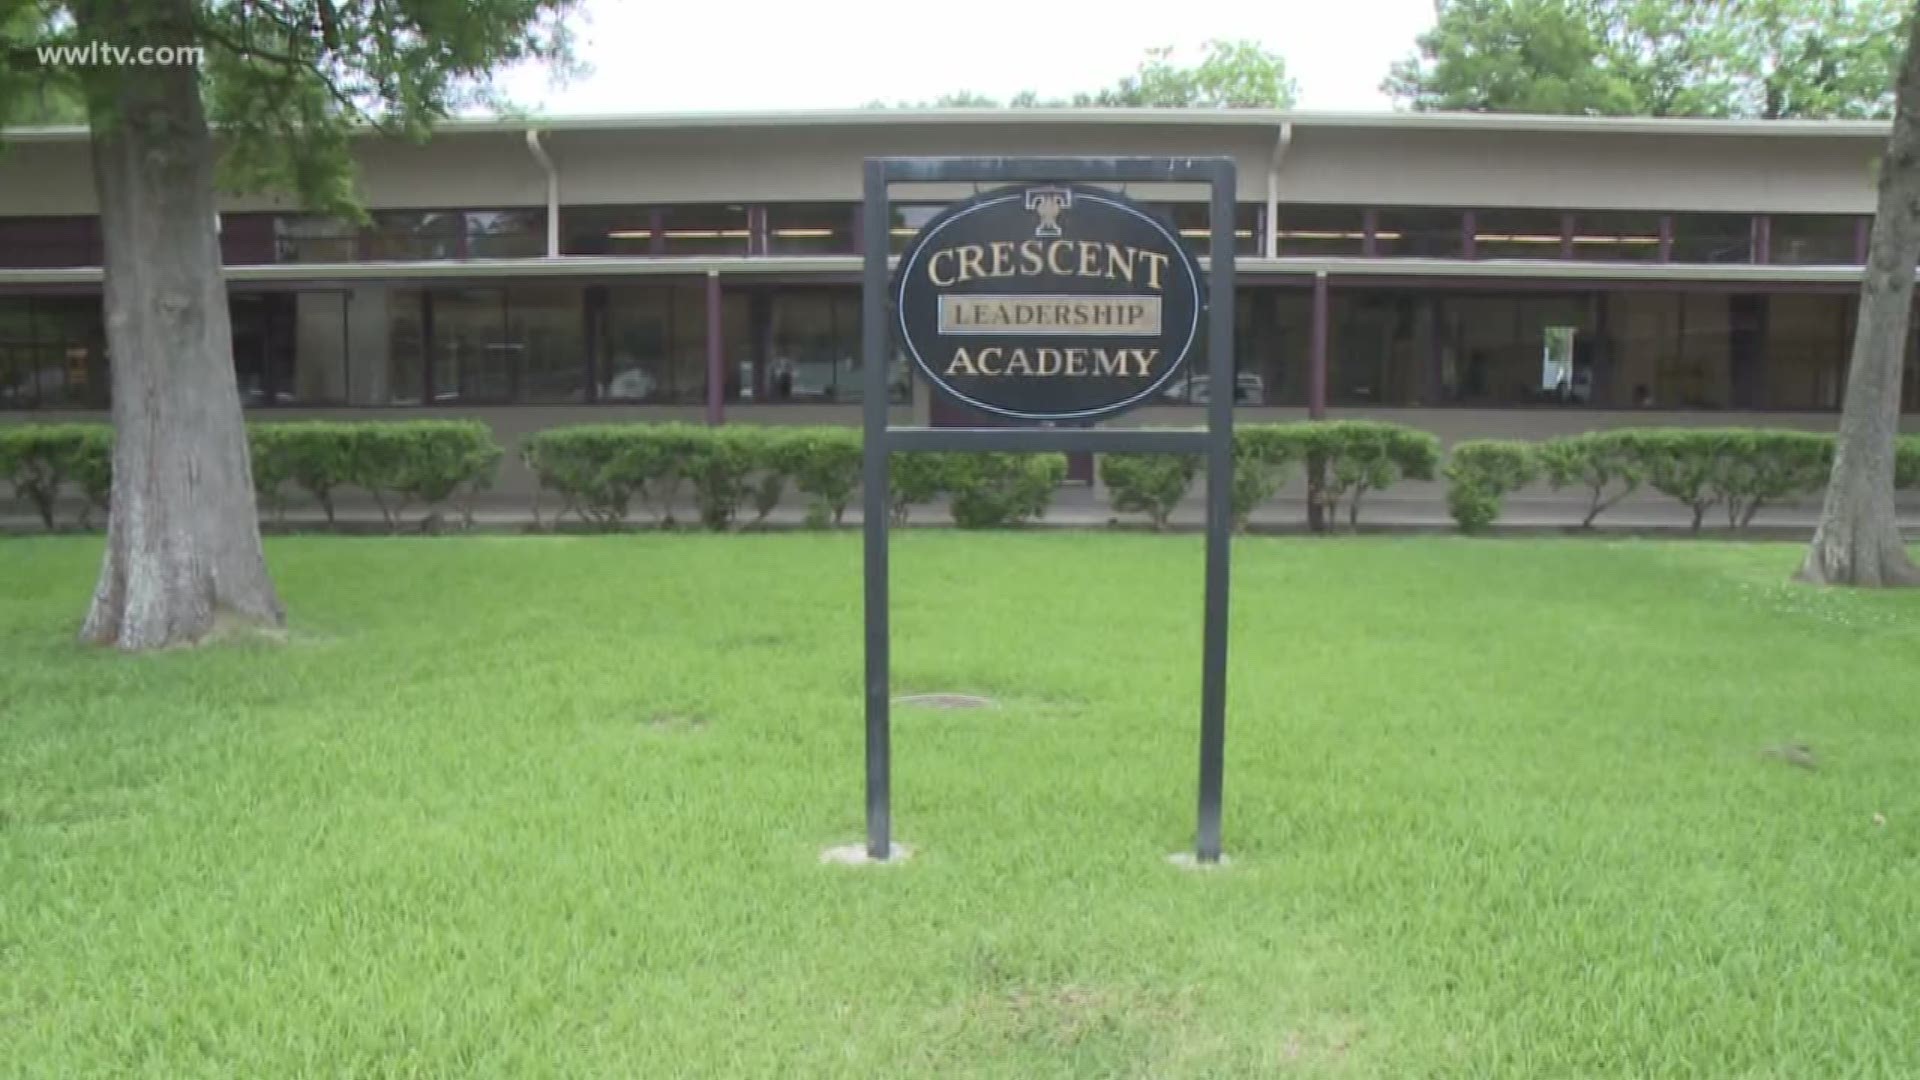 Crescent Leadership Academy is the second New Orleans charter school to abruptly close this year, the New Orleans Advocate reports.